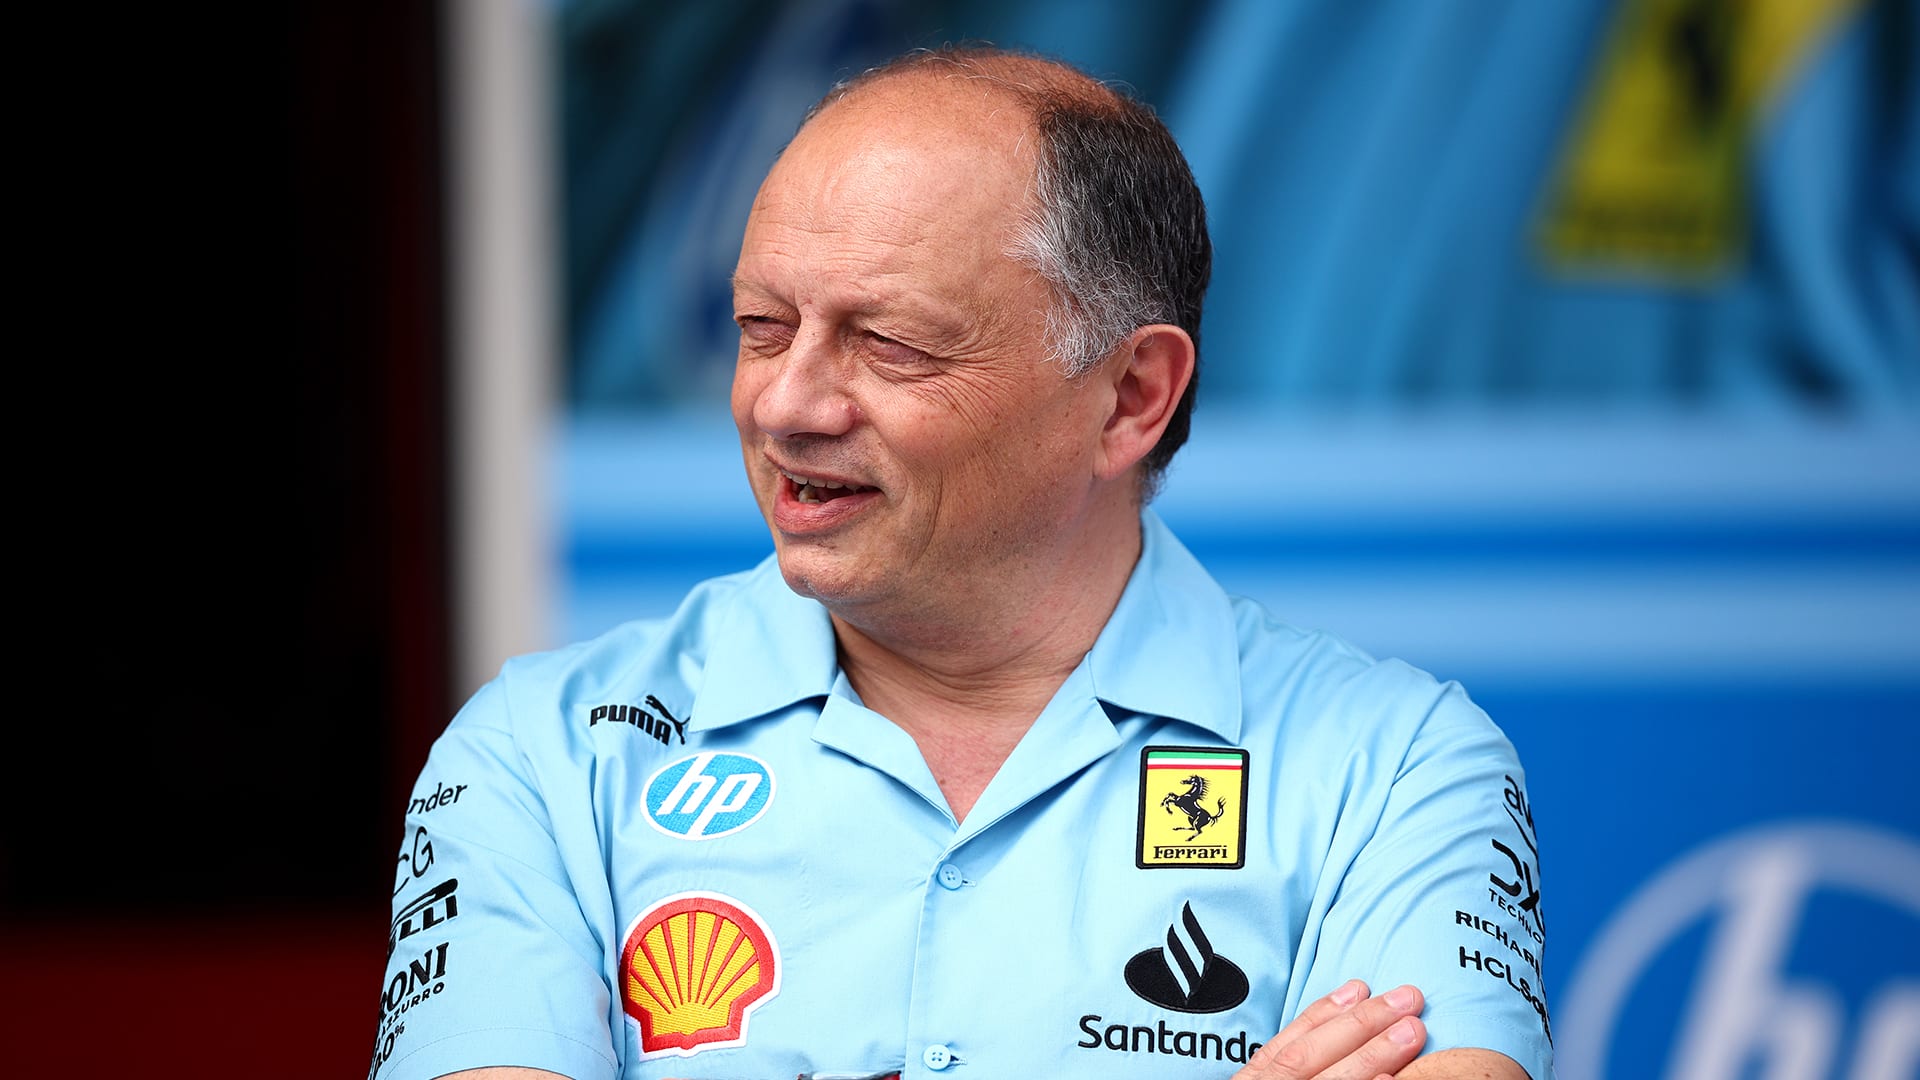 Frederic Vasseur believes Red Bull are no longer in their ‘comfort zone’ after Miami GP defeat